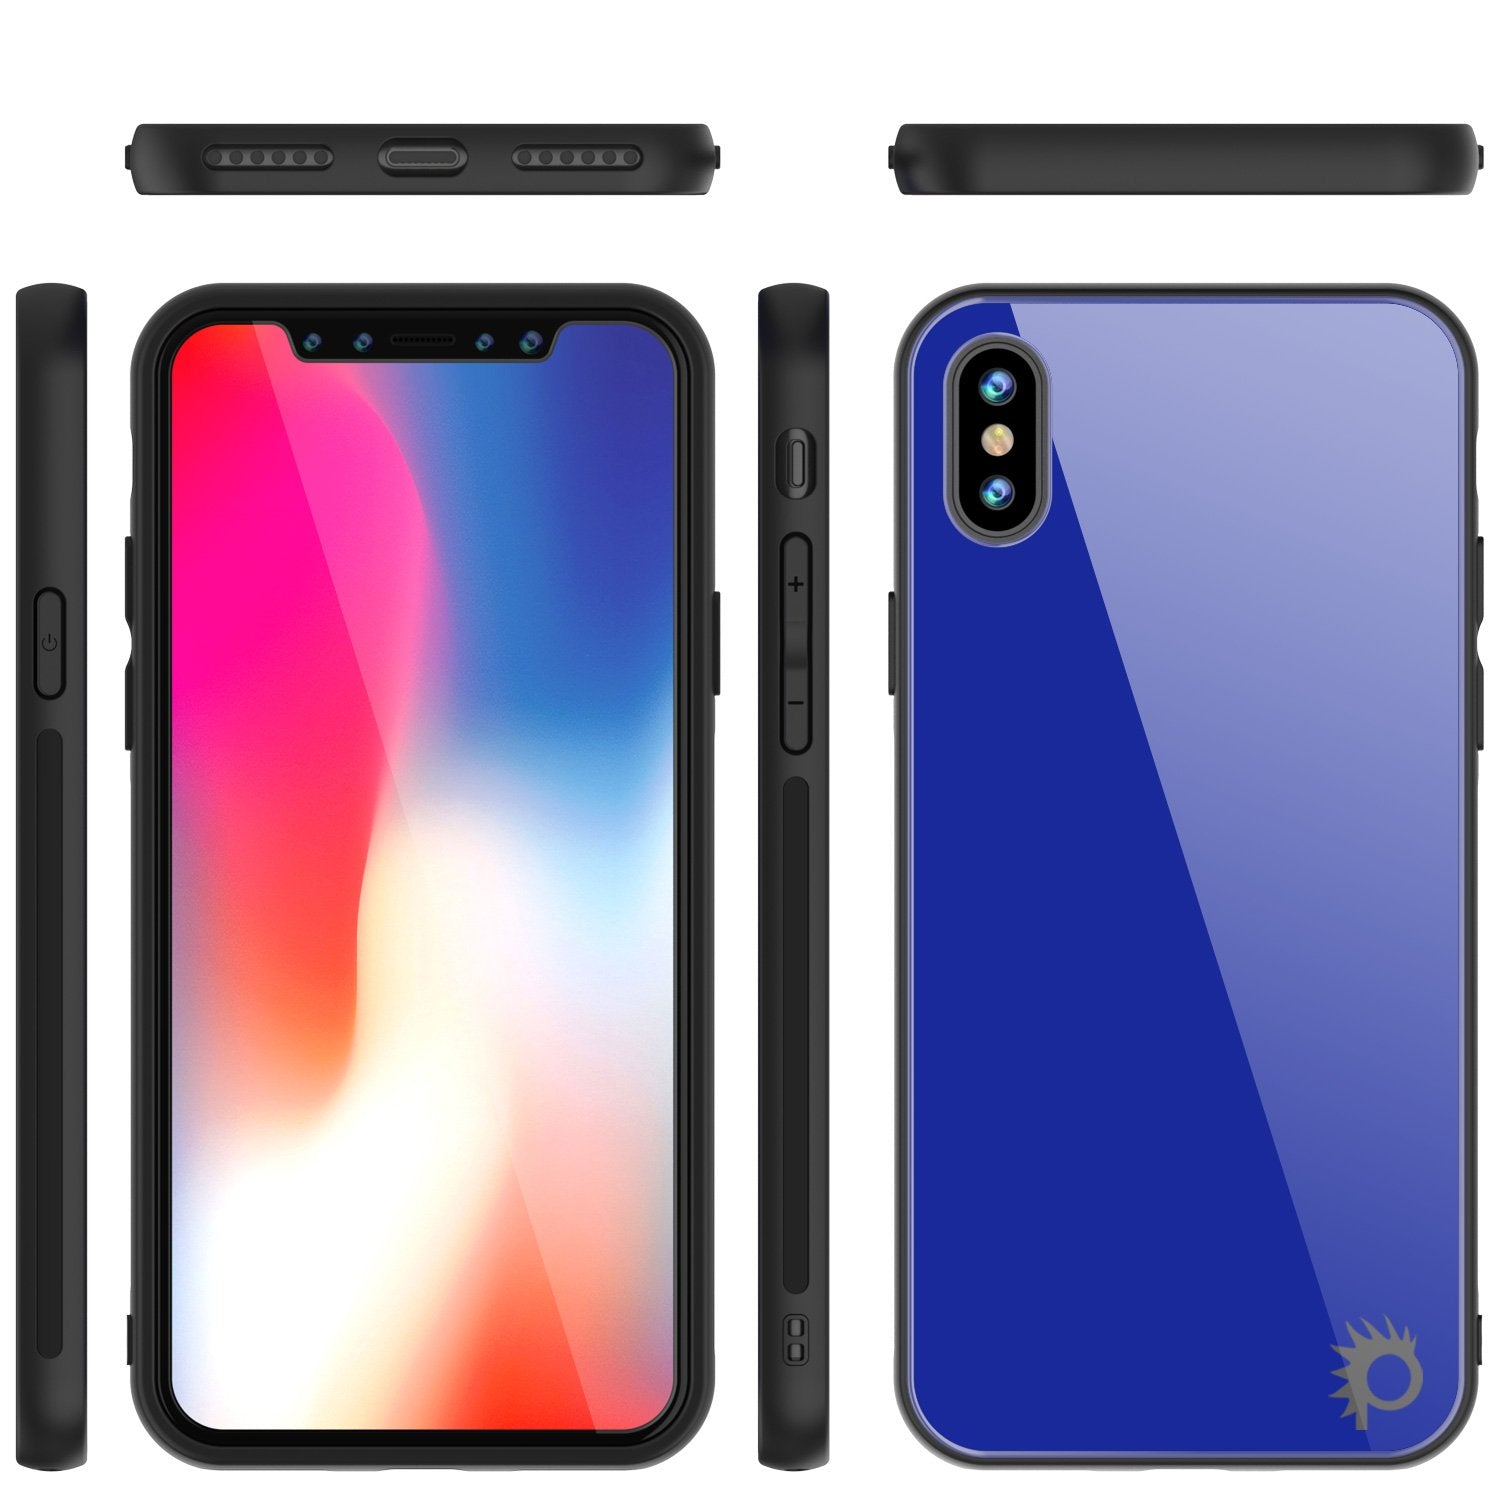 iPhone X Case, Punkcase GlassShield Ultra Thin Protective 9H Full Body Tempered Glass Cover W/ Drop Protection & Non Slip Grip for Apple iPhone 10 [Blue]